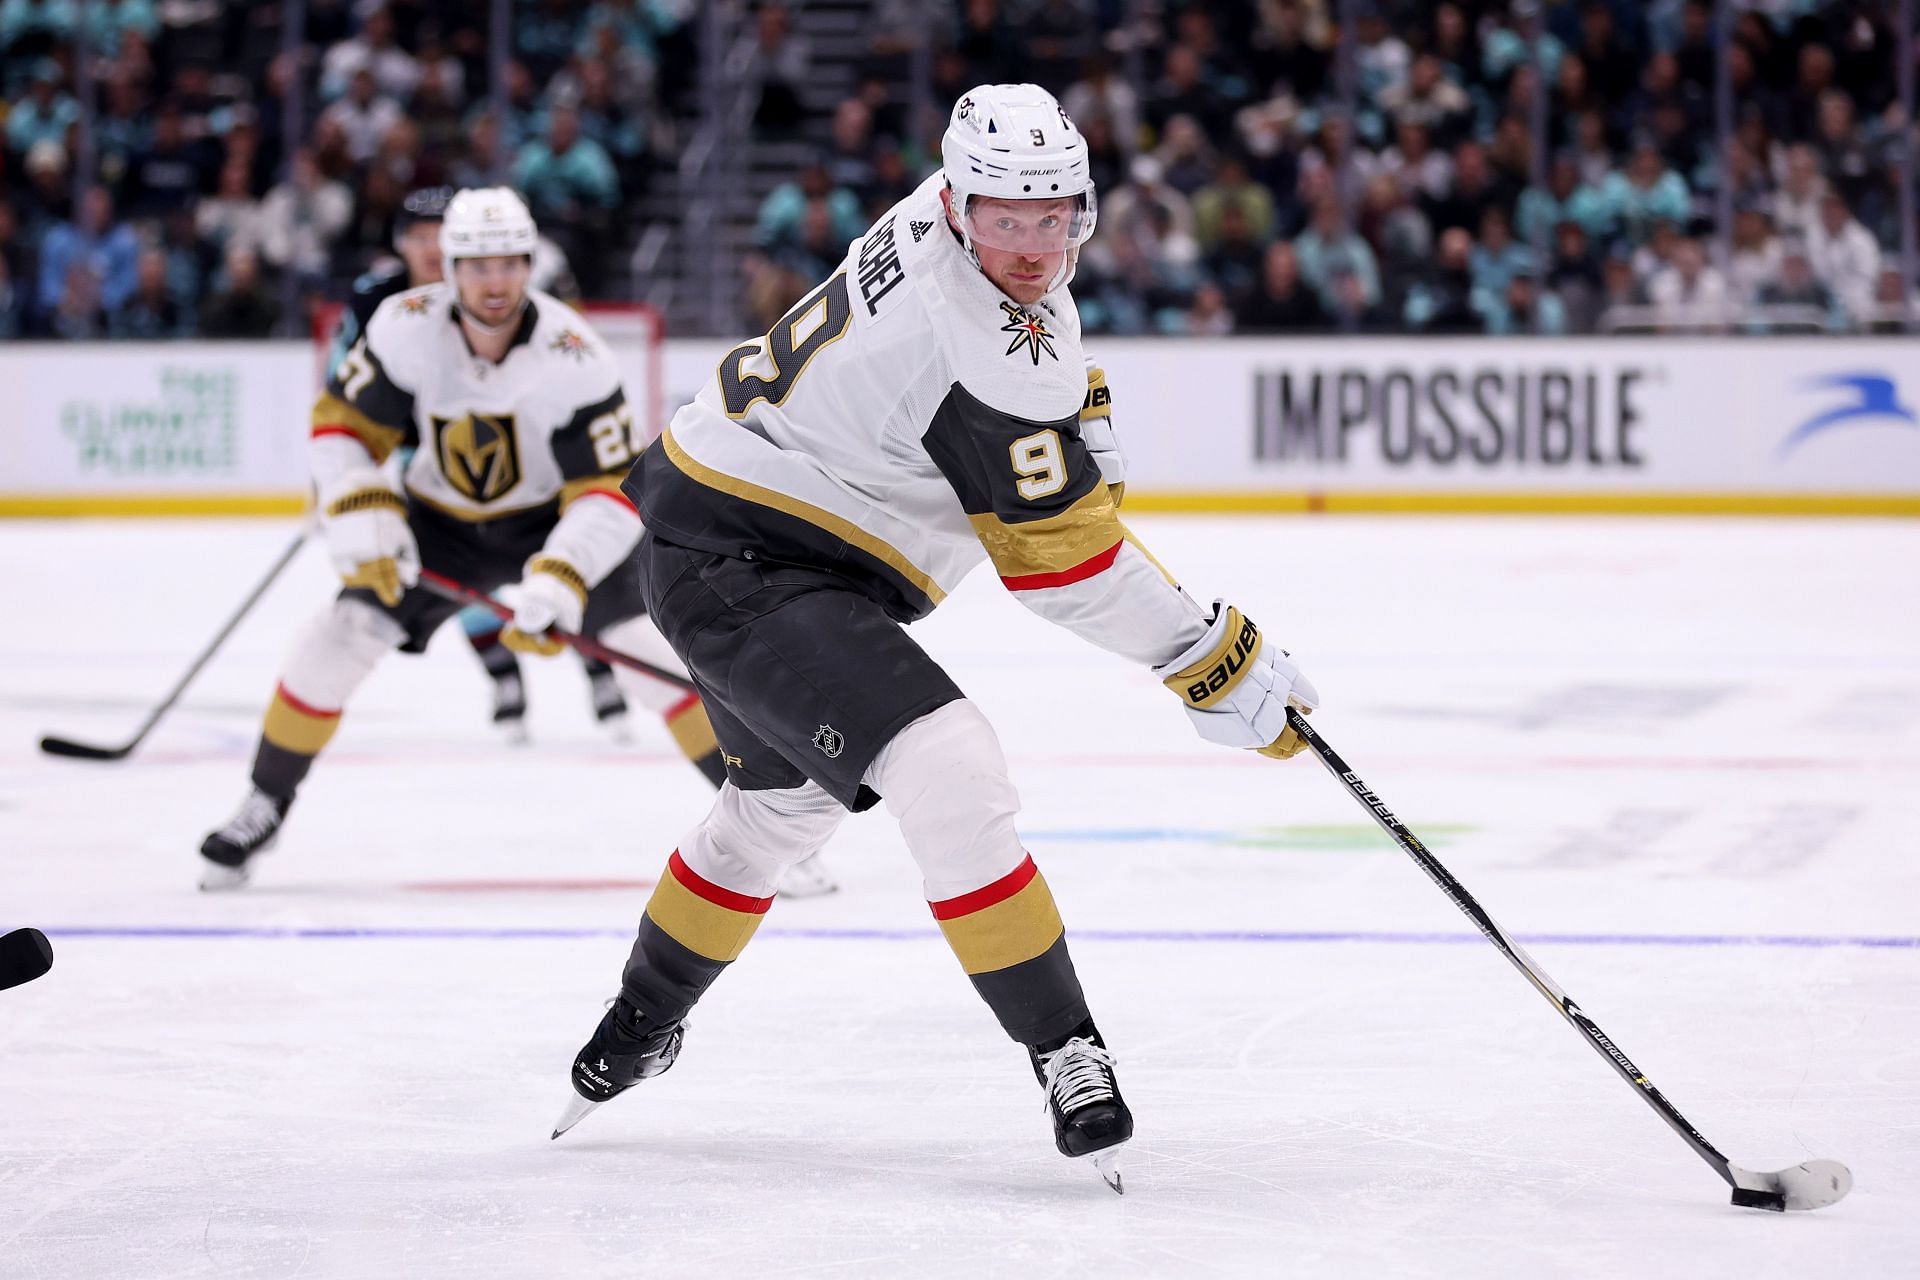 Golden Knights 2022-23 schedule released by NHL, Golden Knights